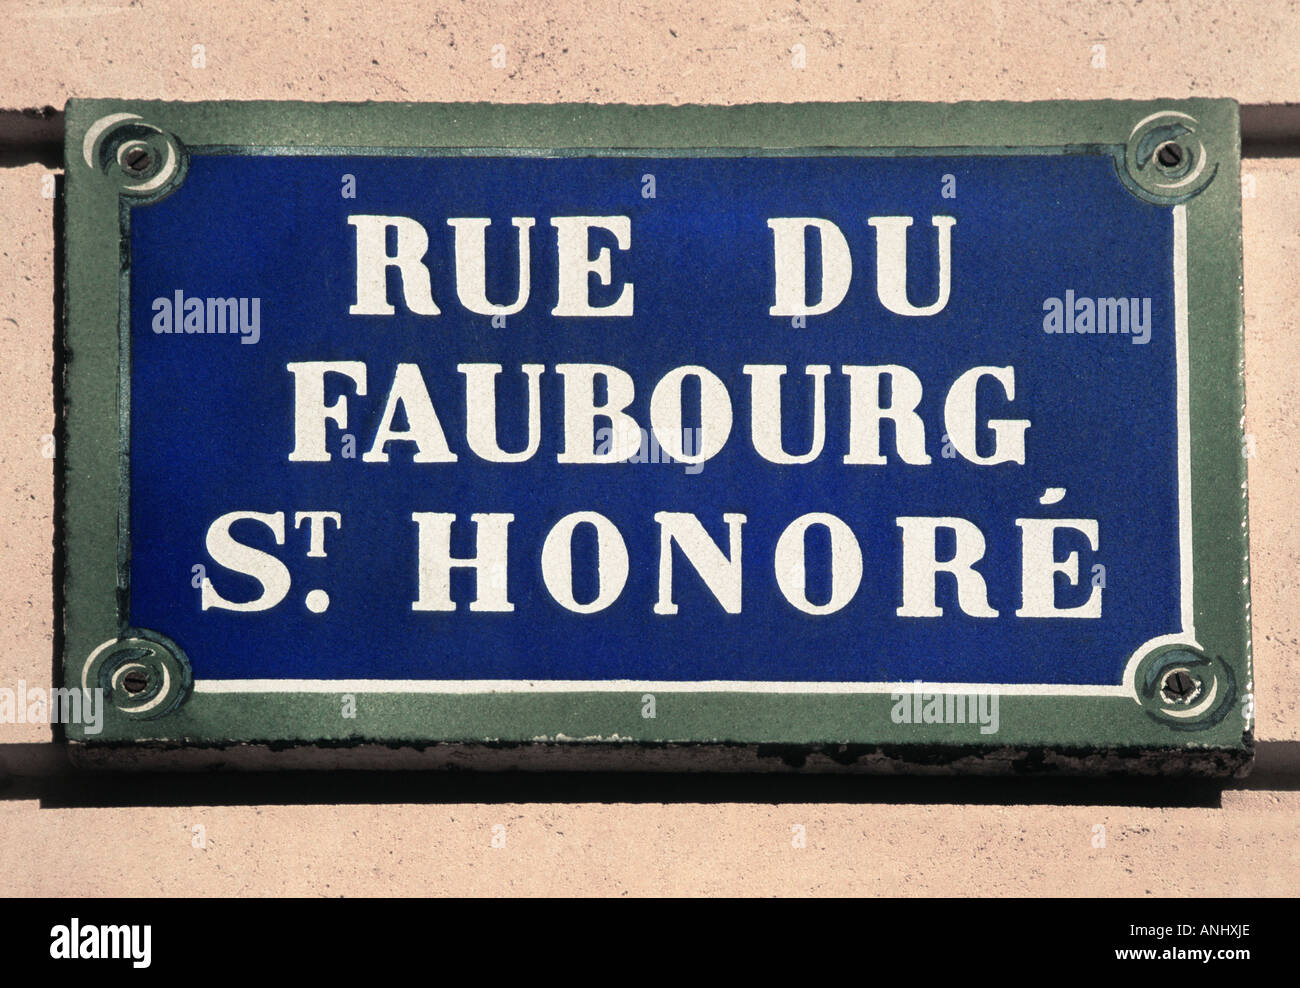 Europe Paris France Rue  du Faubourg St Honore Street Sign Stock Photo